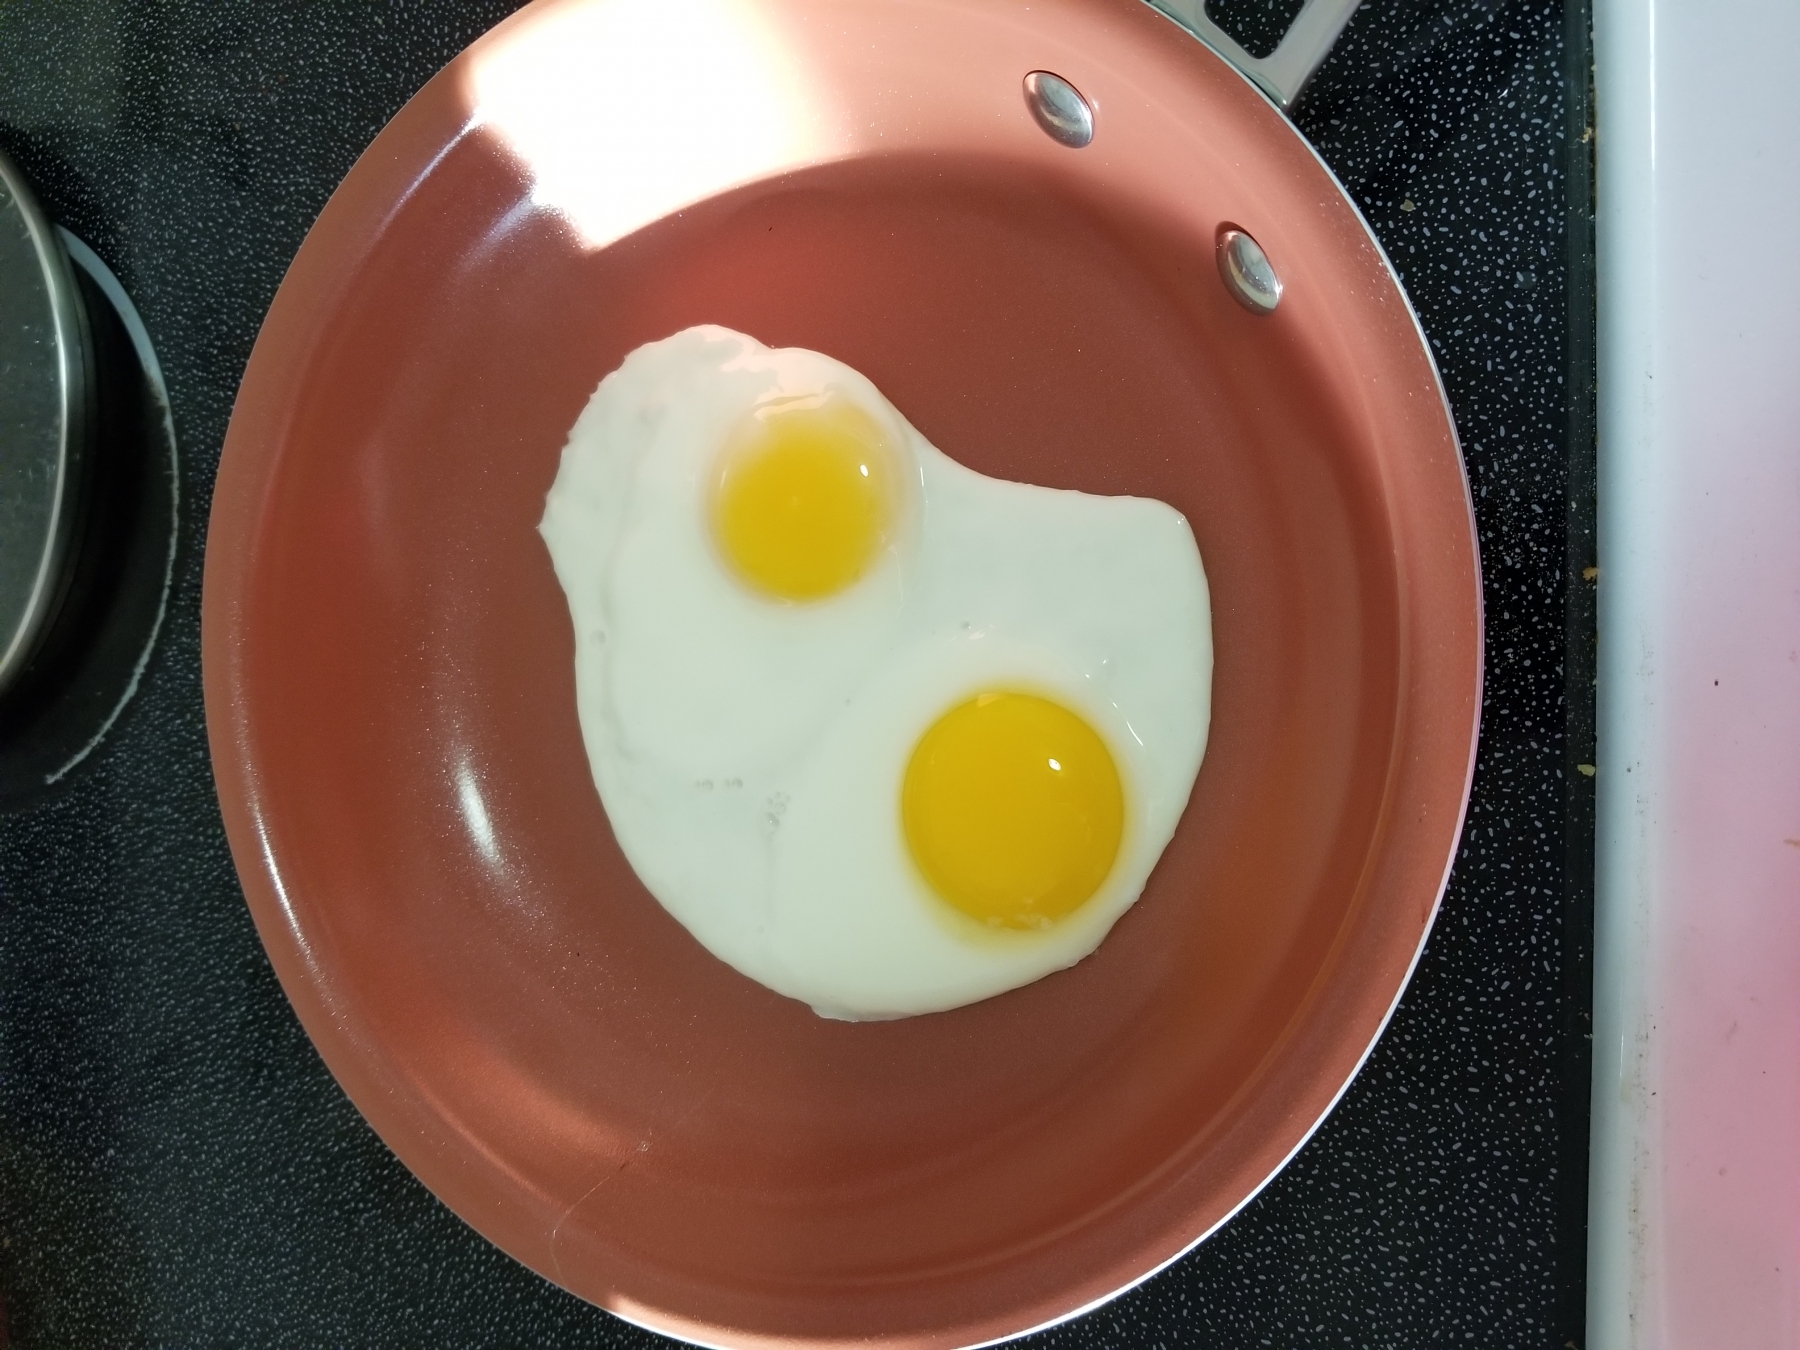 Love this Pan! I now make perfect eggs!